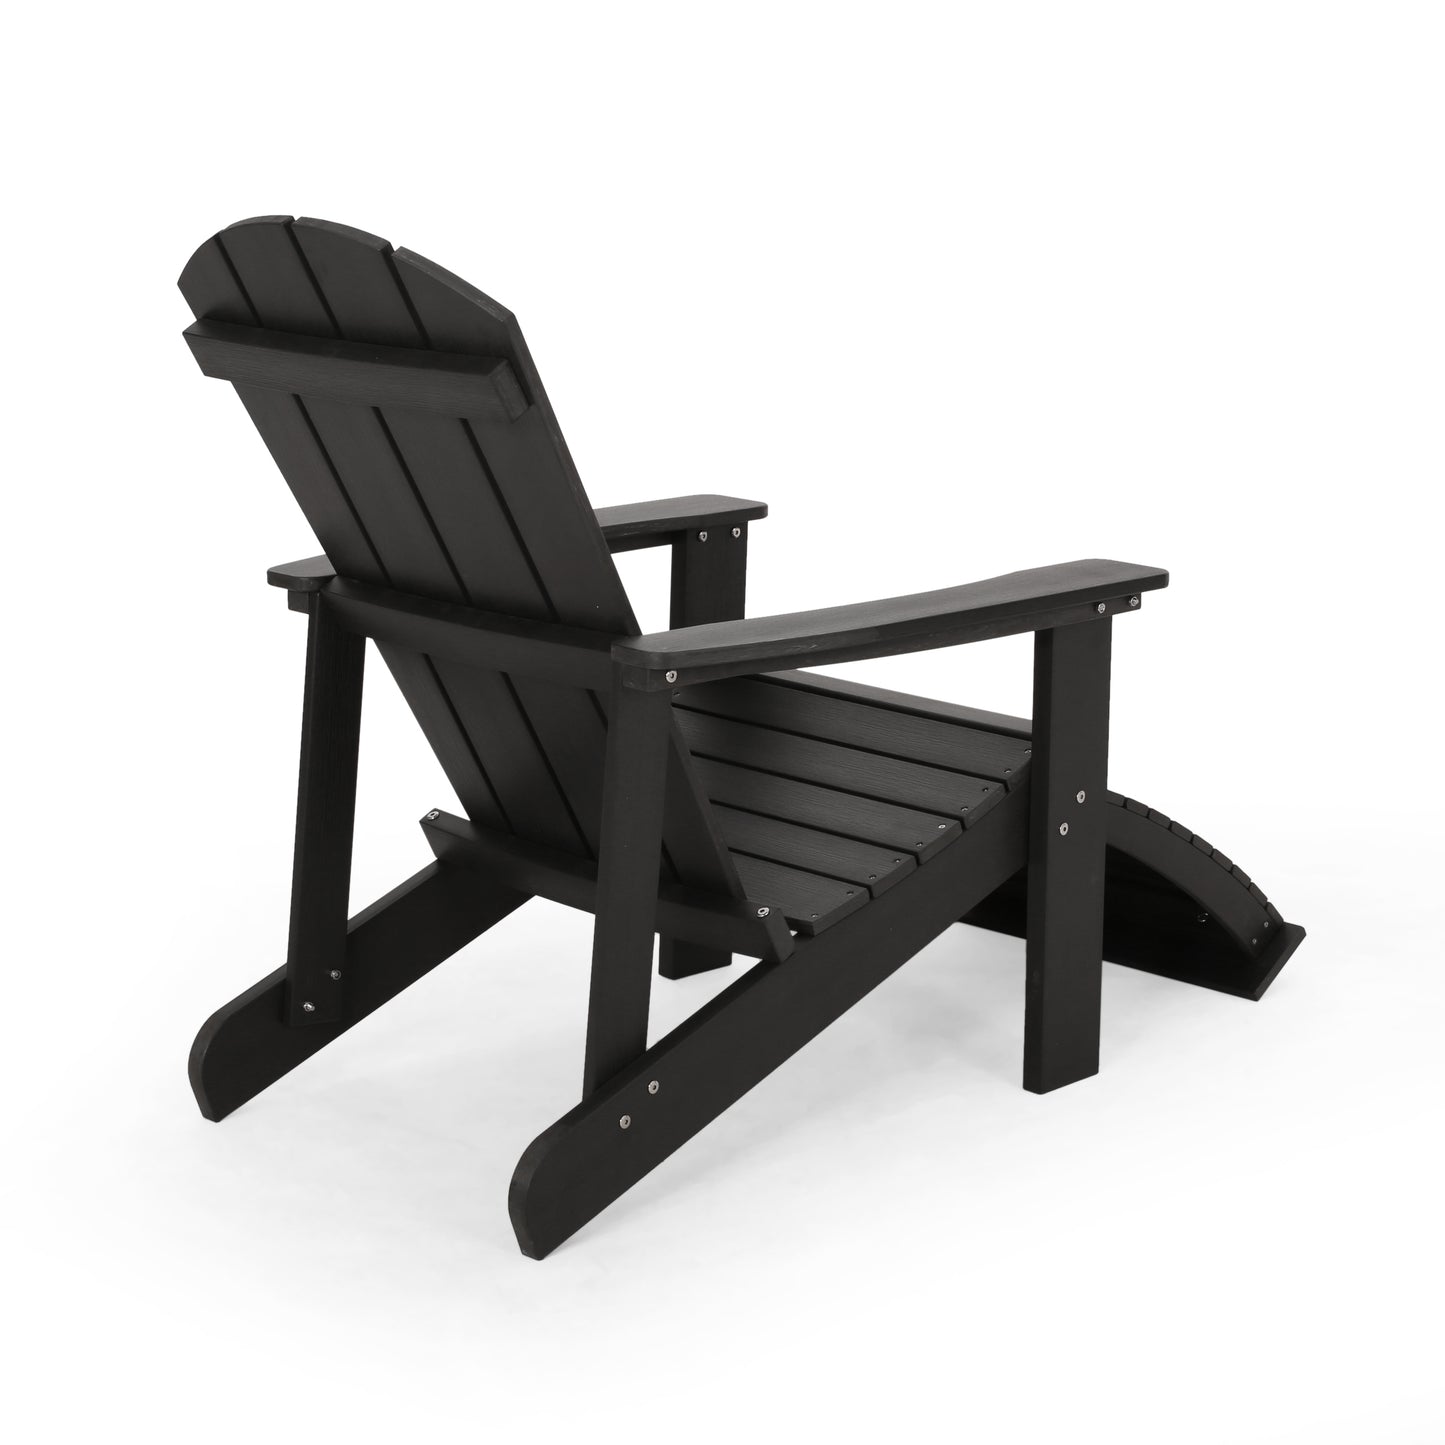 Outdoor Solid Black Classic Solid Wood Adirondack Lounge Chair (Set of 1)